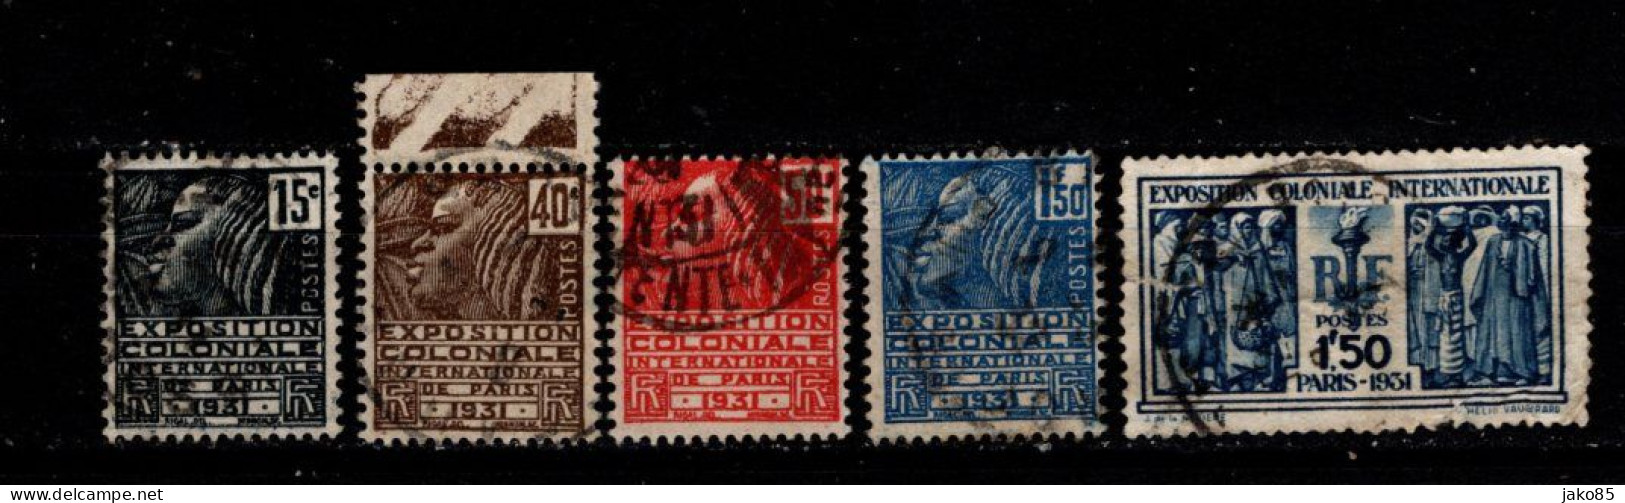 - FRANCE - 1930 - YT N° 270 / 274 - Oblitérés - Expo Coloniale - Used Stamps